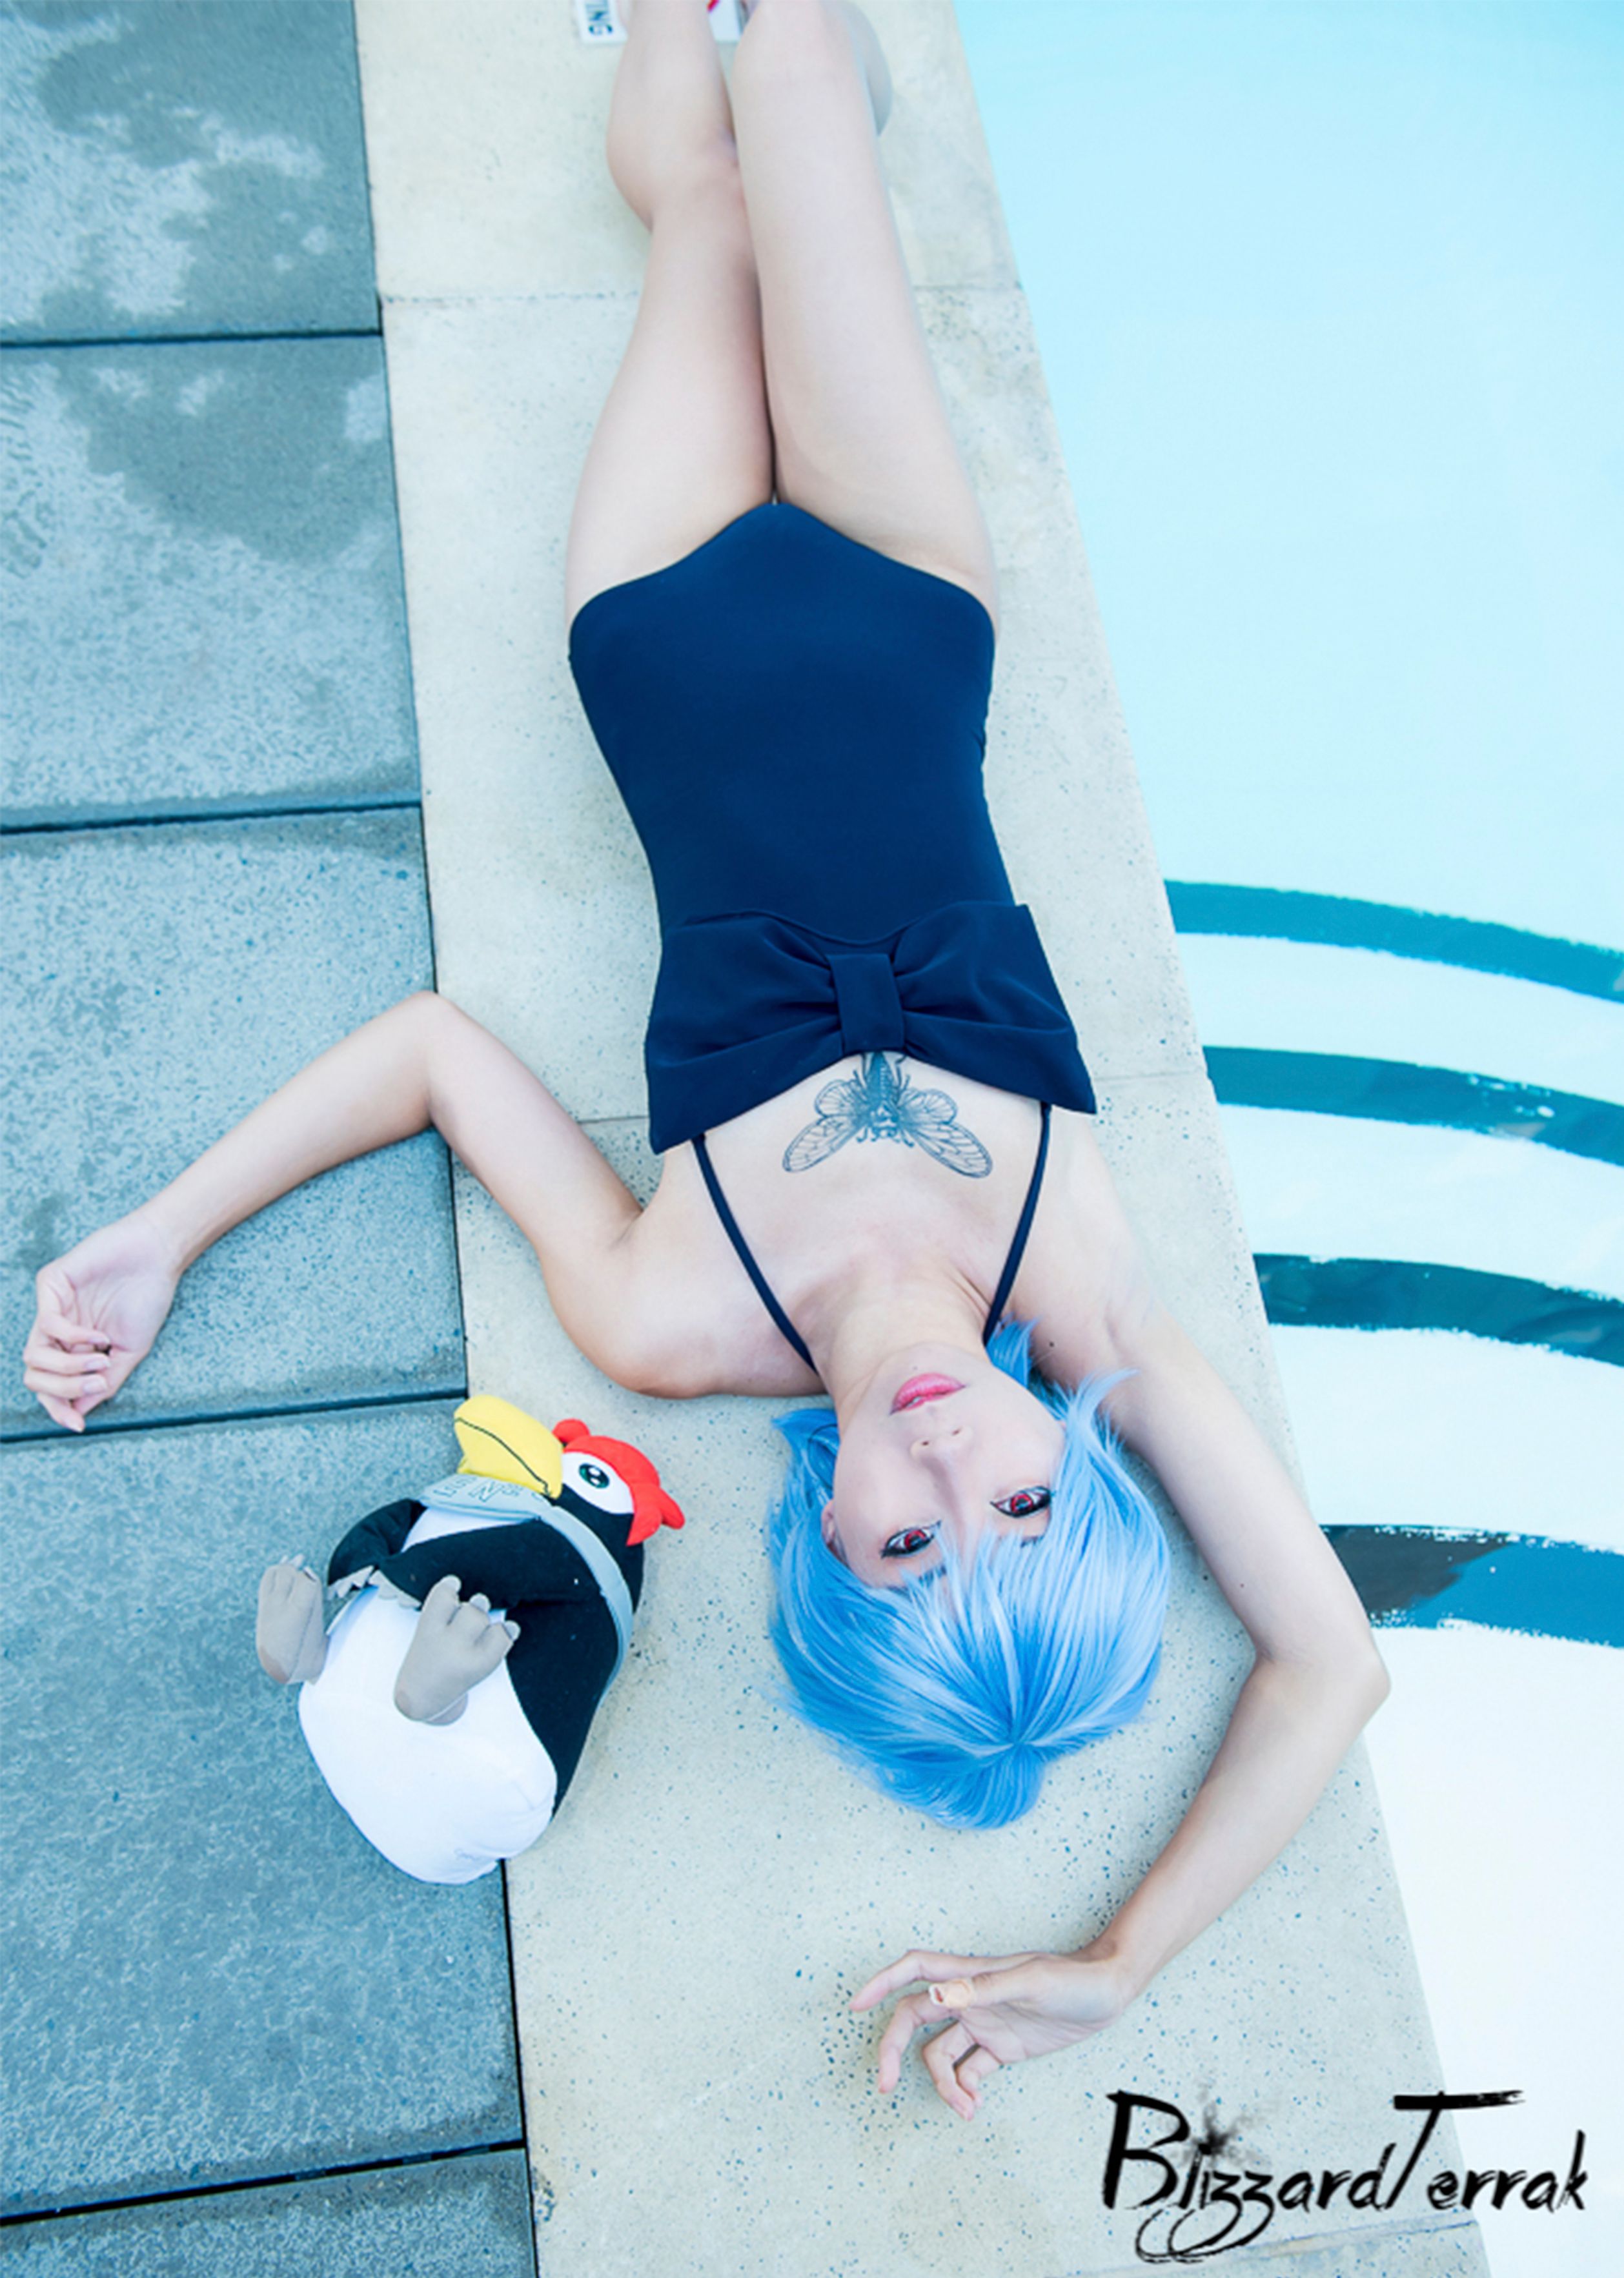 Evangelion 10 Amazing Rei Cosplays That Look Just Like The Anime